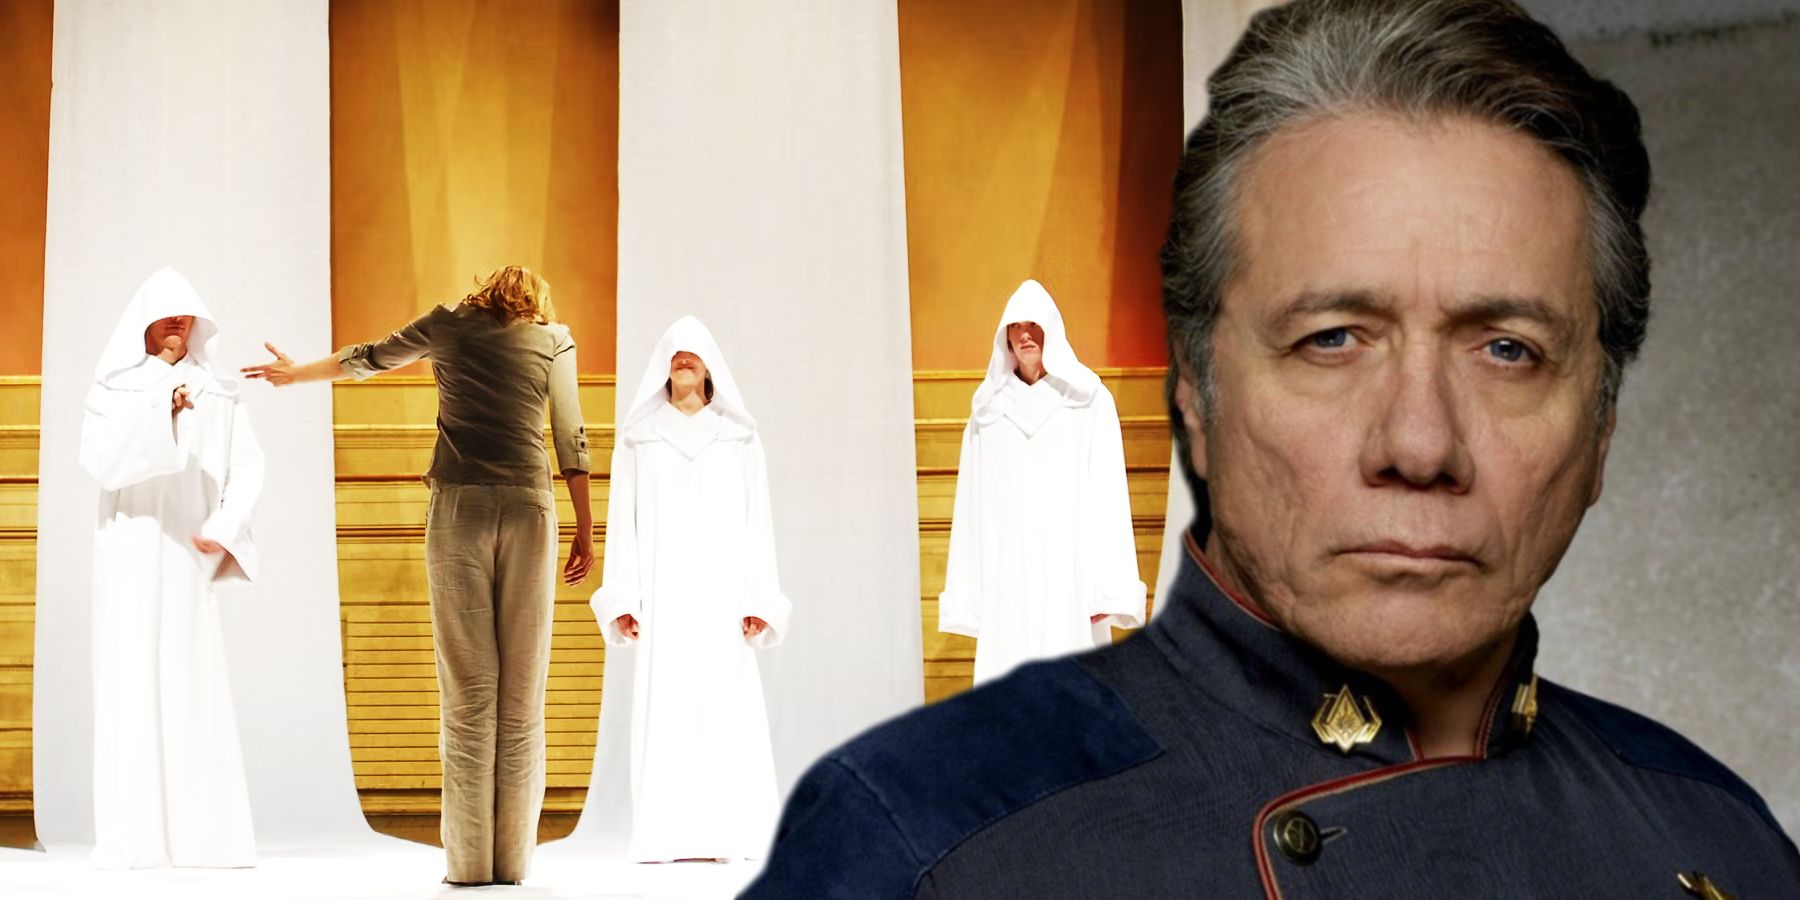 The Five in BSG and Edward James Olmos as Commander William Adama